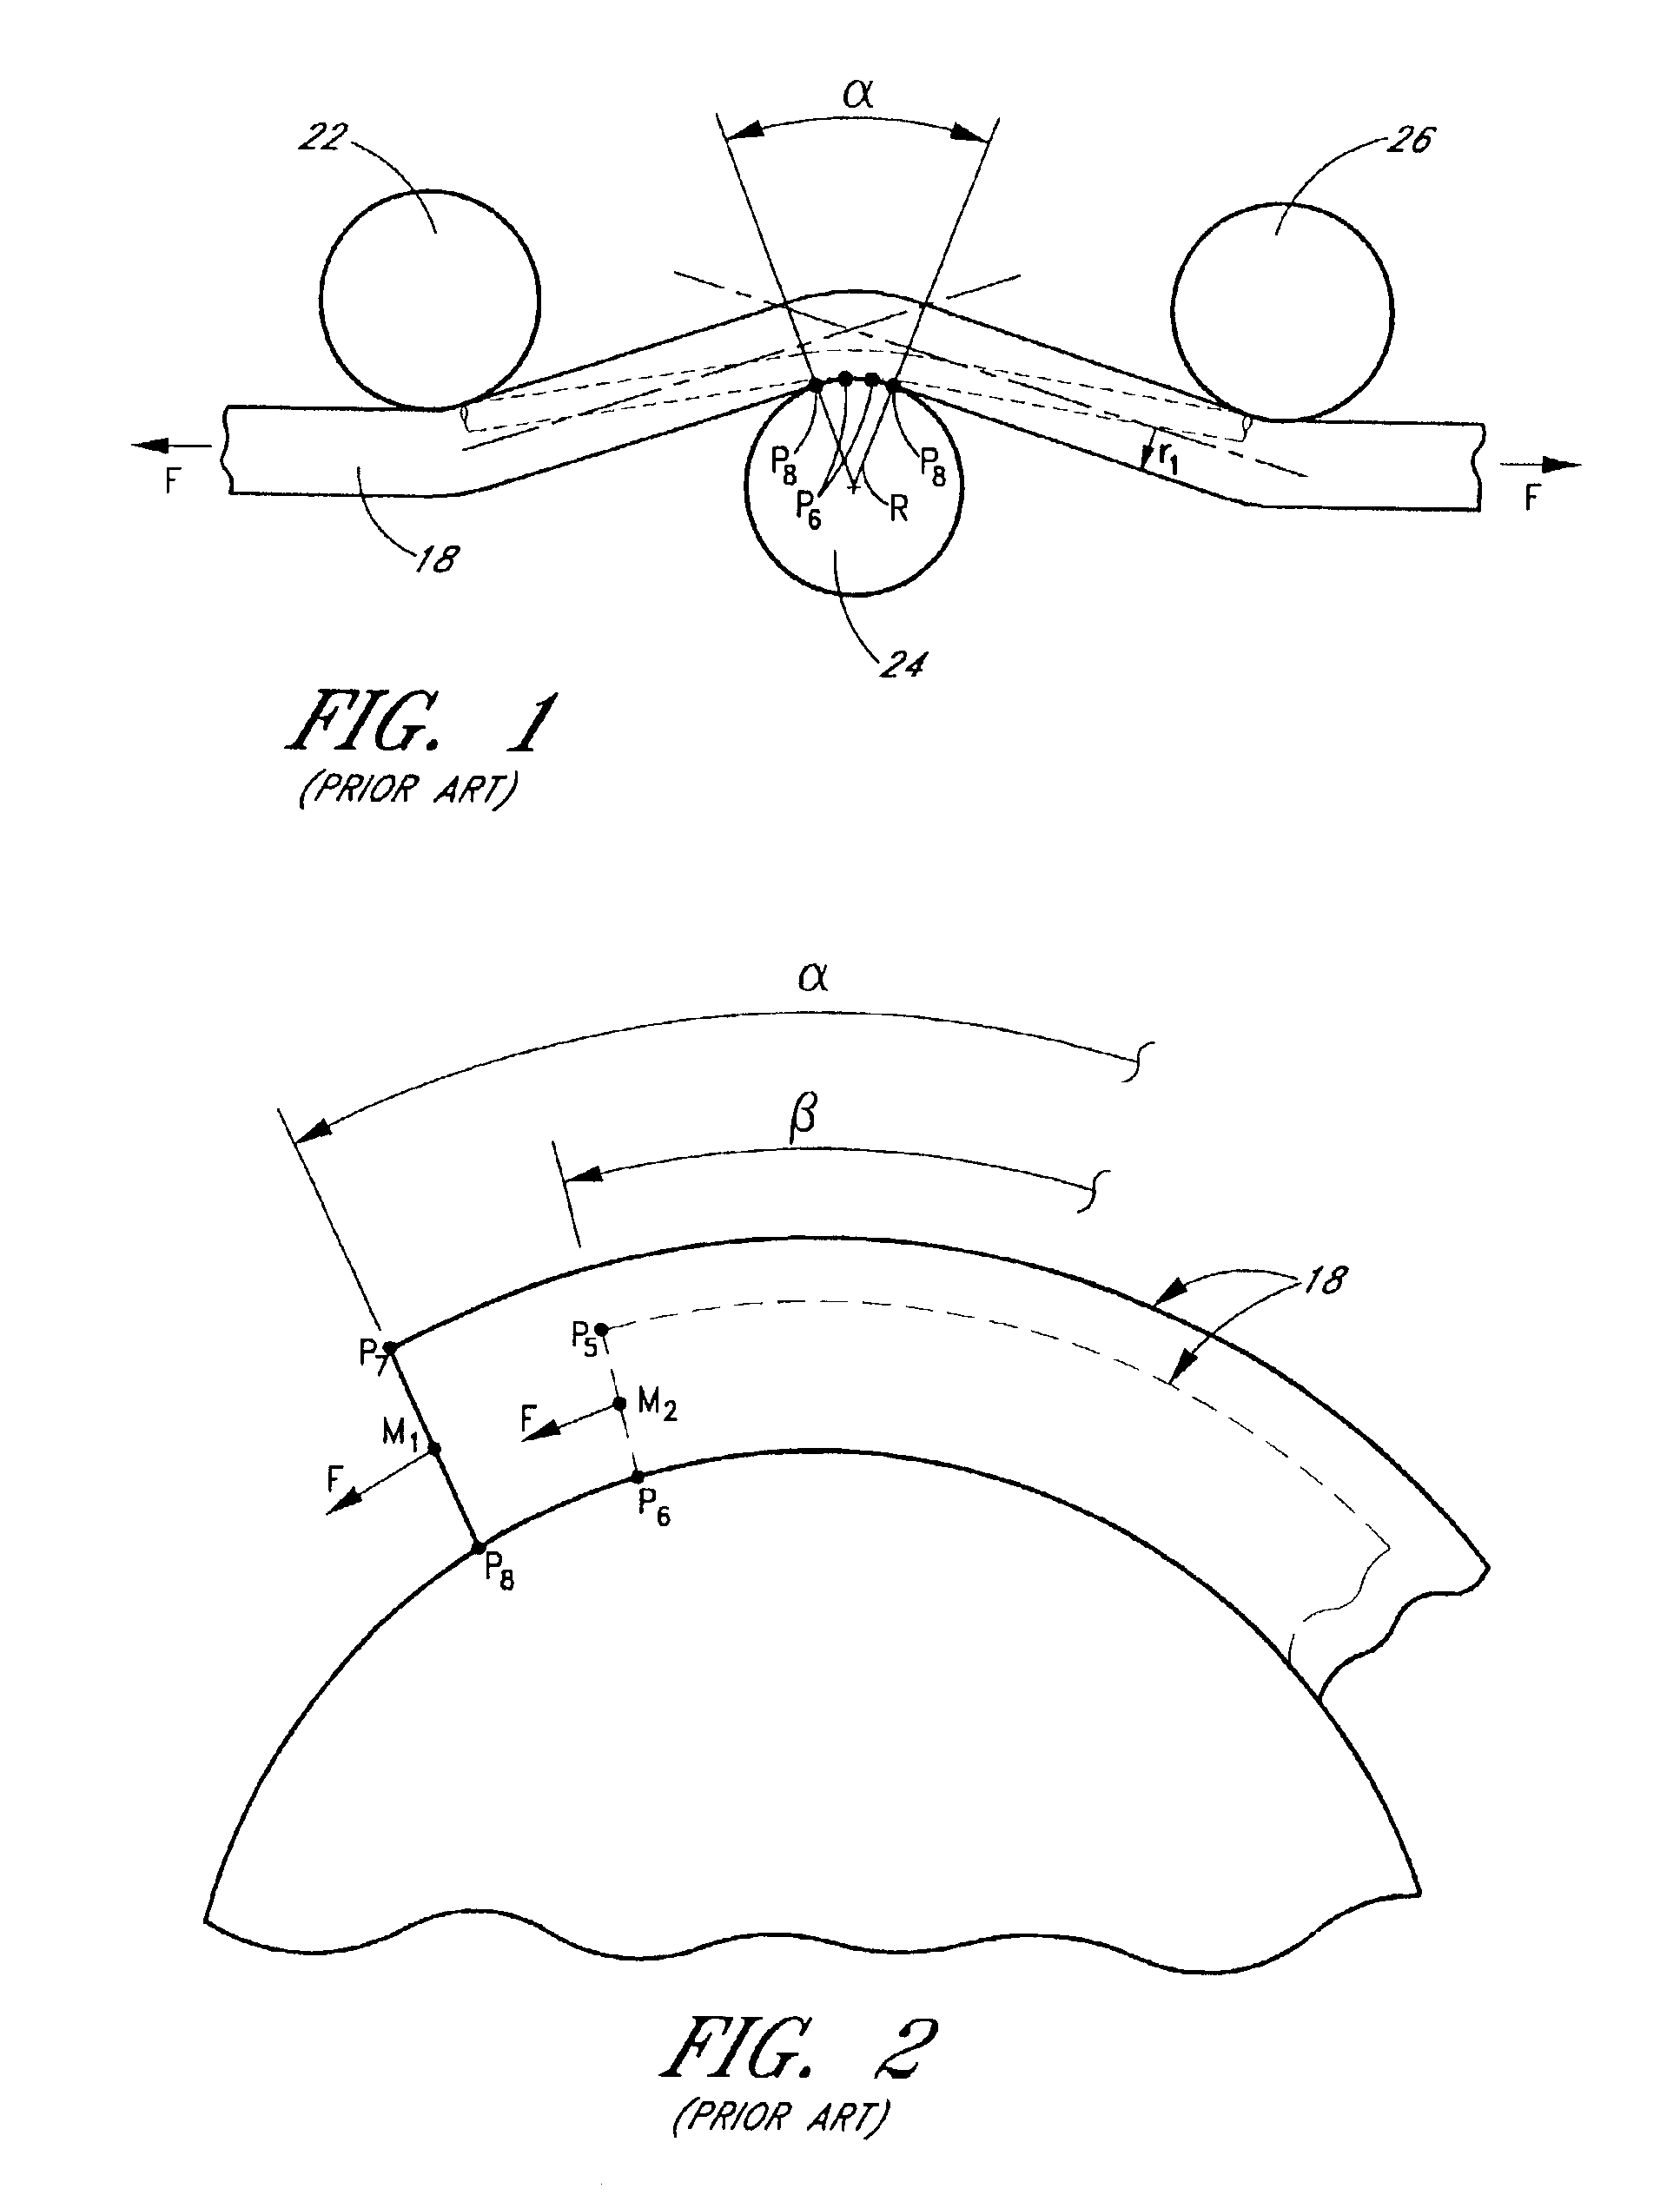 Tension measuring device for mooring line